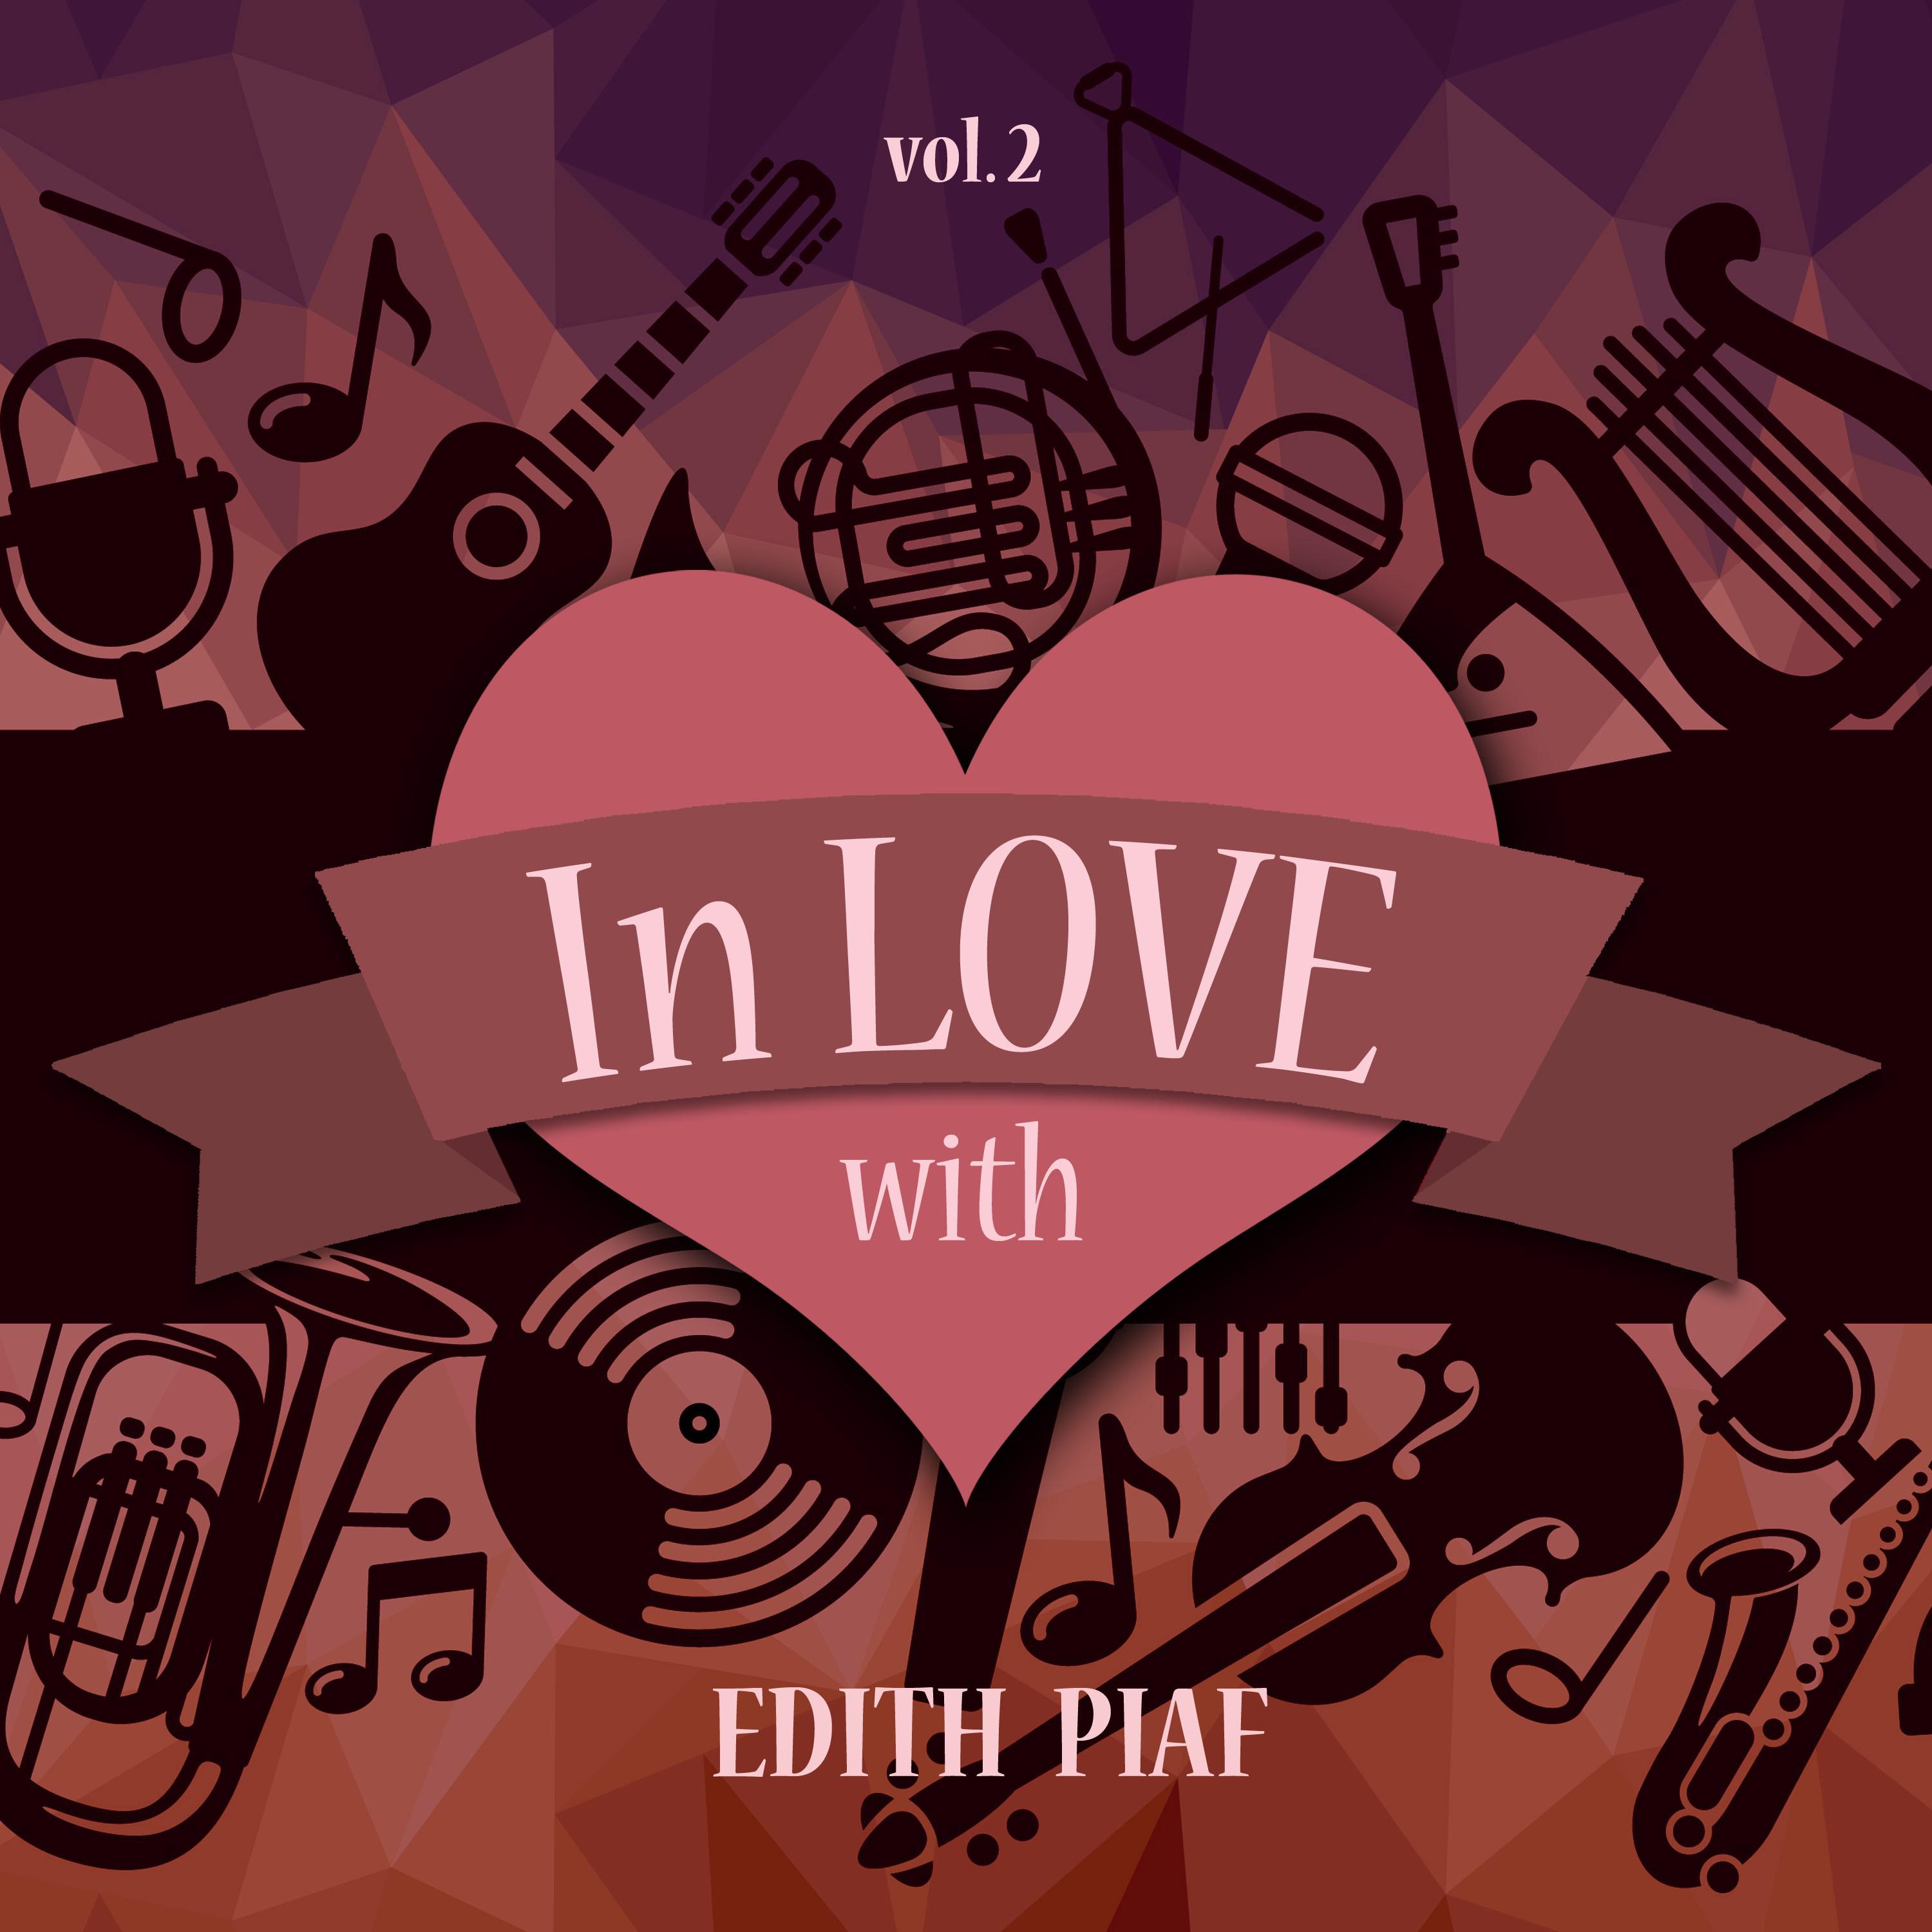 In Love with Edith Piaf, Vol. 2